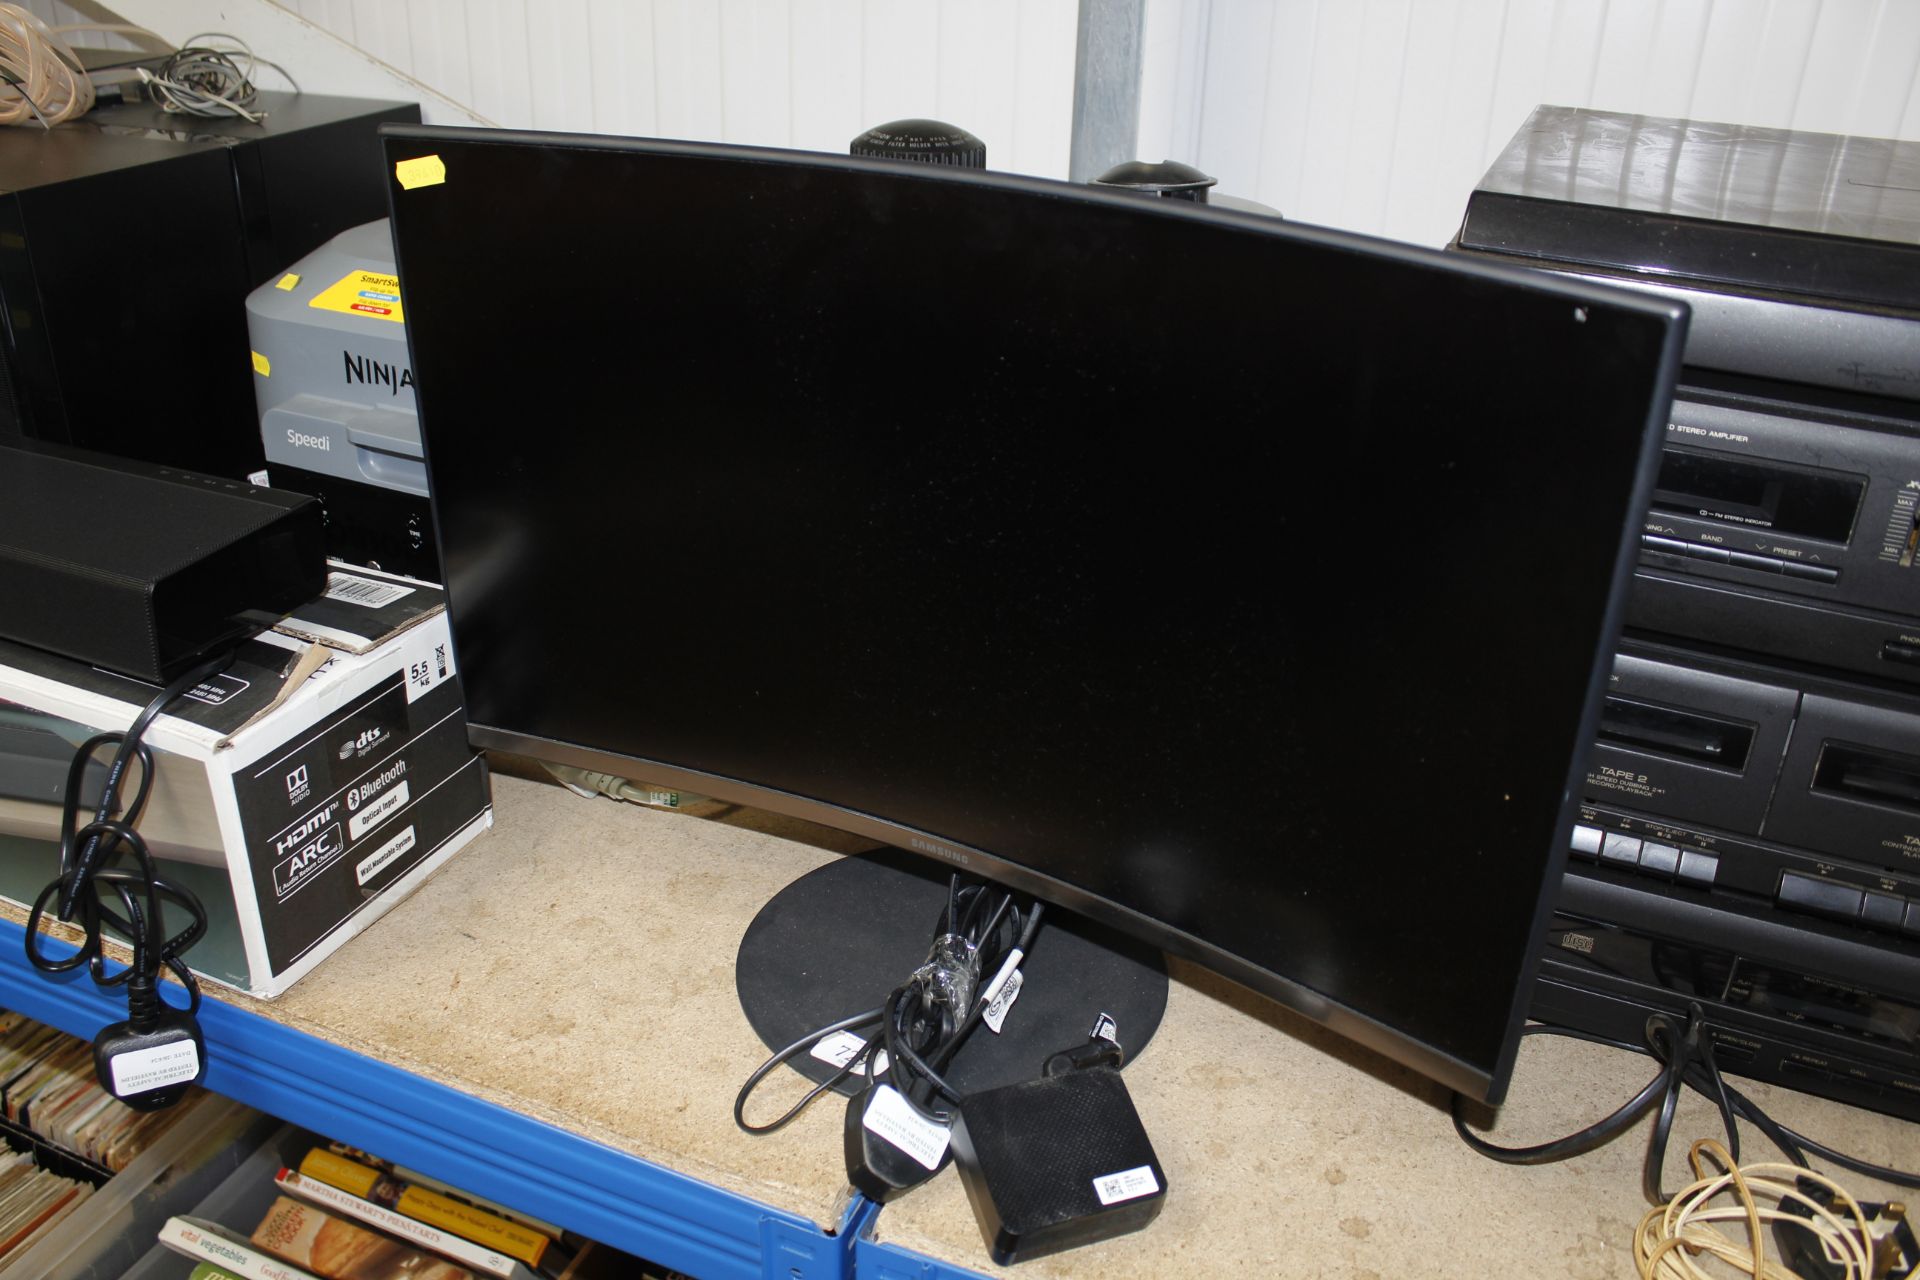 A Samsung curved monitor